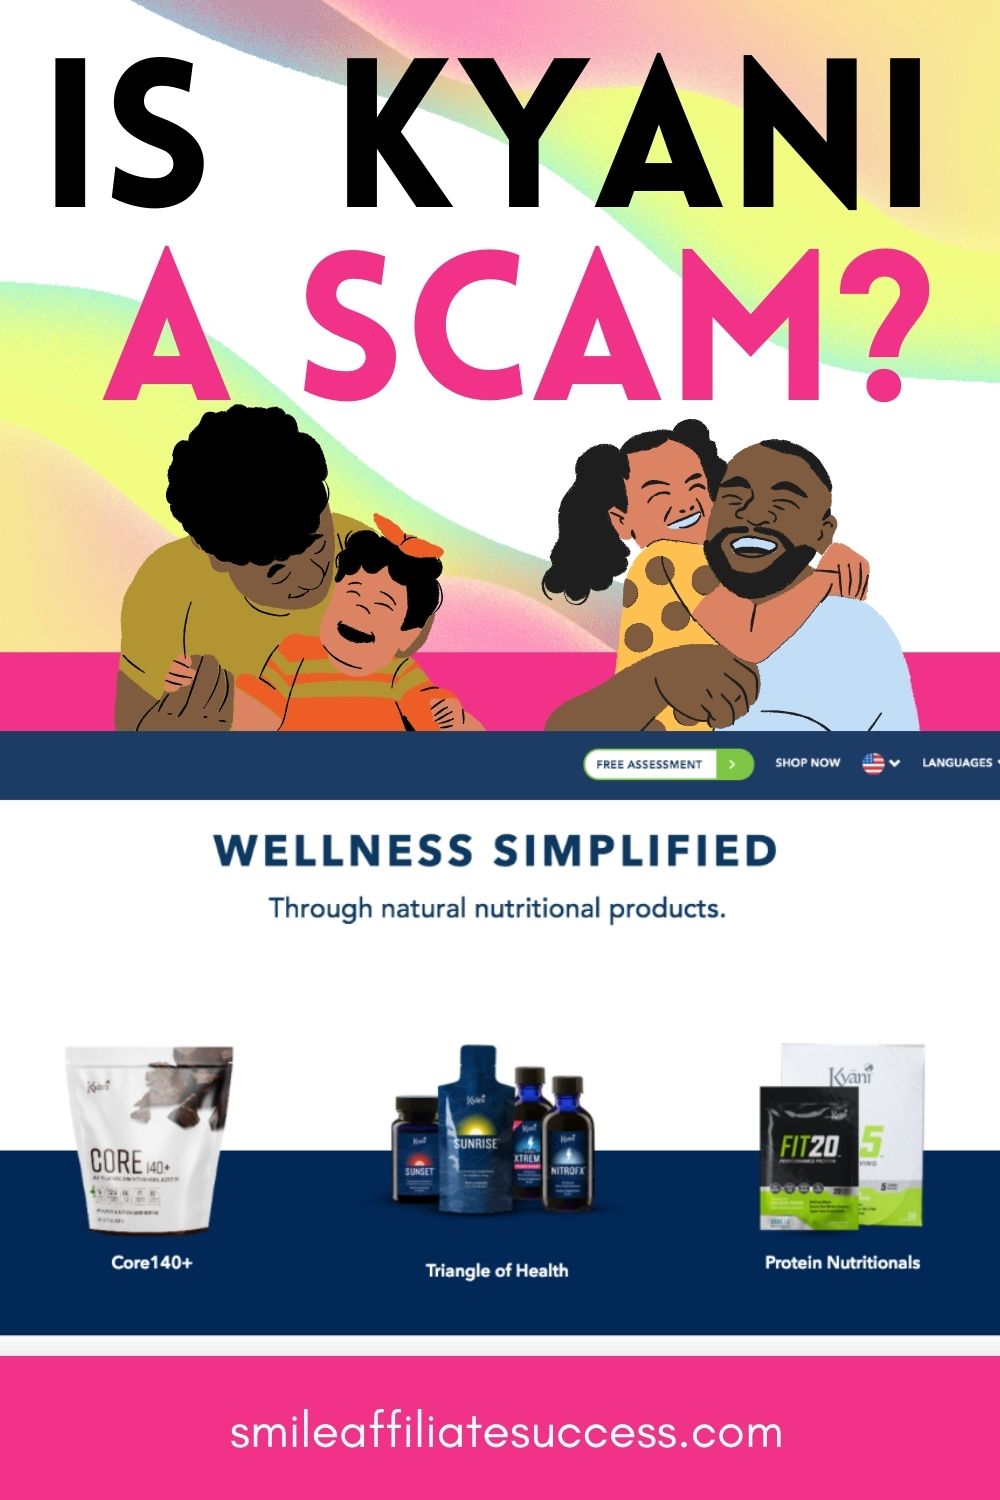 Is Kyani A Scam?